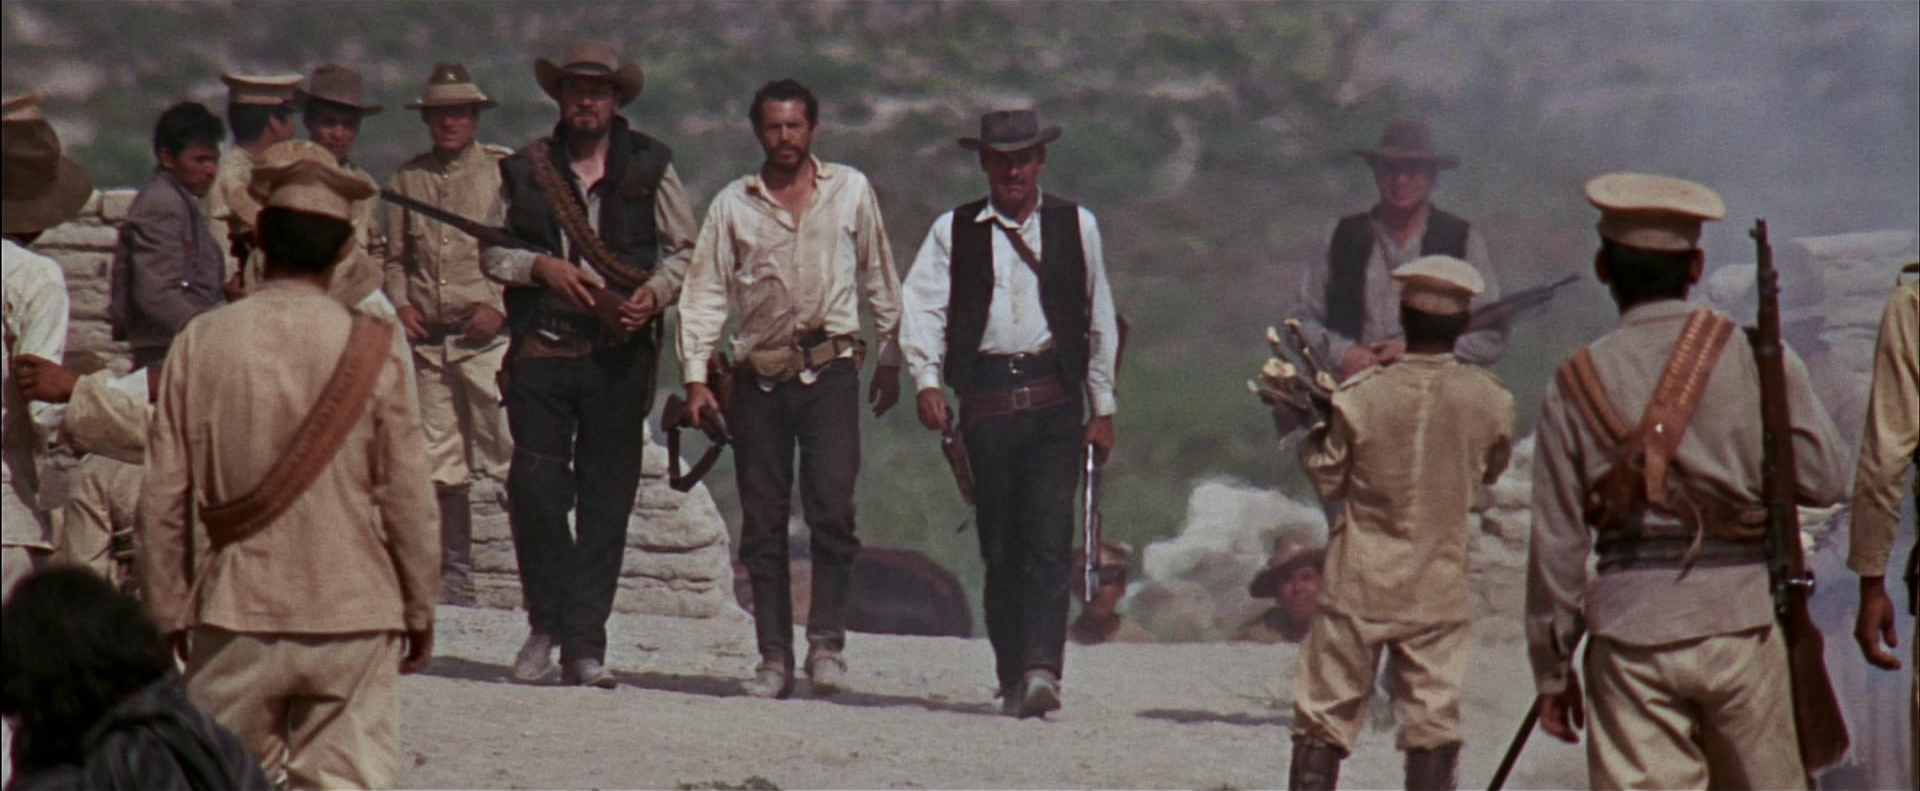 The bandits march armed through a Mexican town.